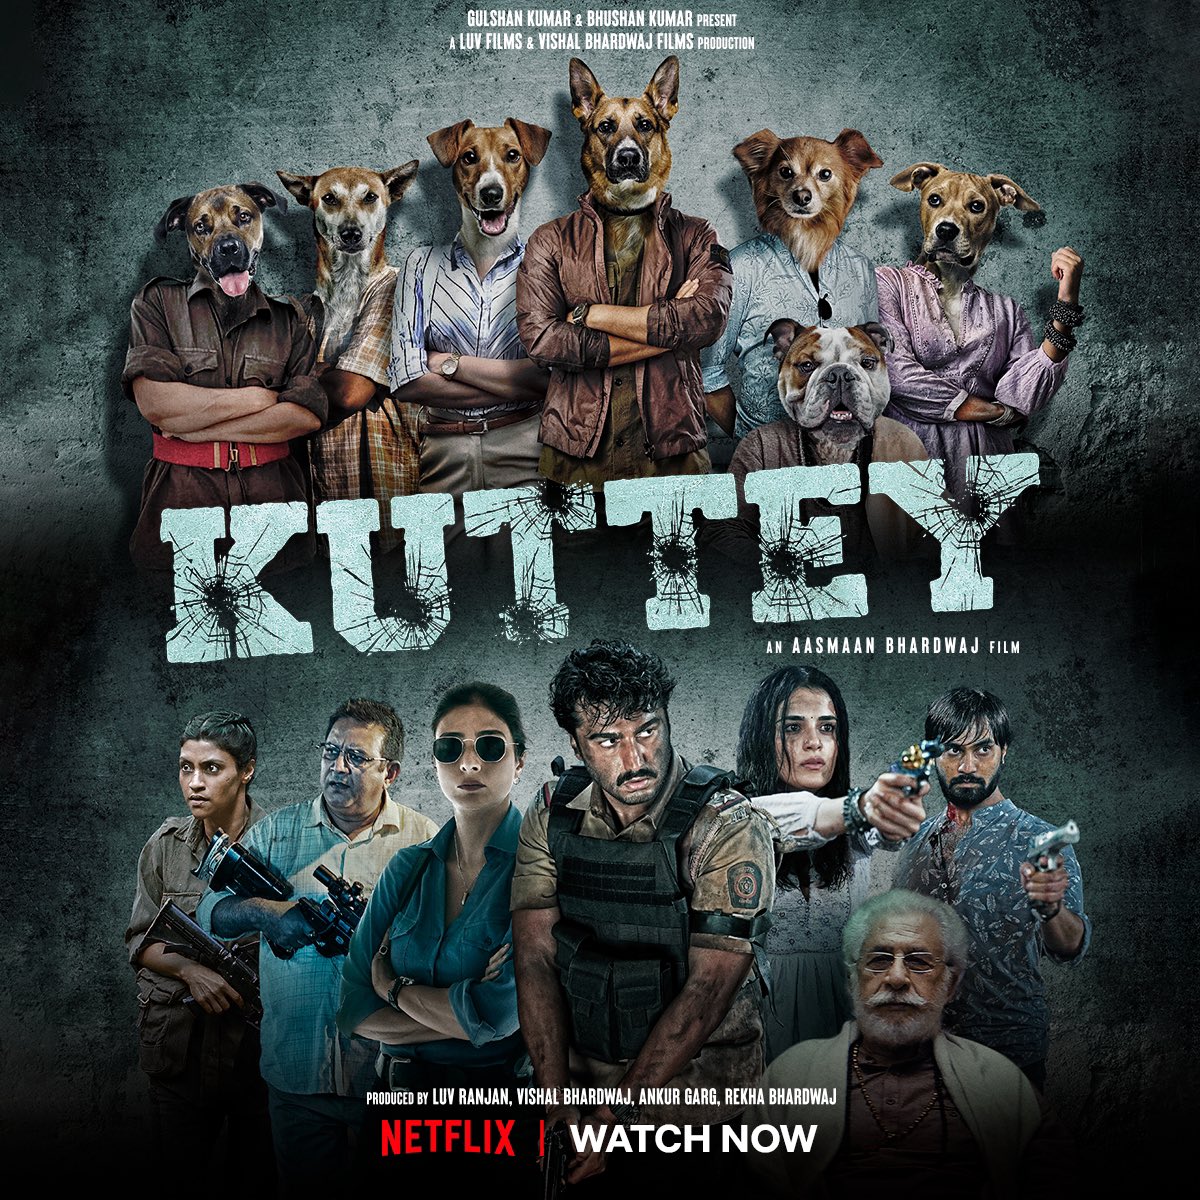 #Kuttey is finally out on Netflix. Grateful to the entire cast and crew for helping me to realise my vision and for supporting me in making exactly what I wanted to. Excited for what’s next!